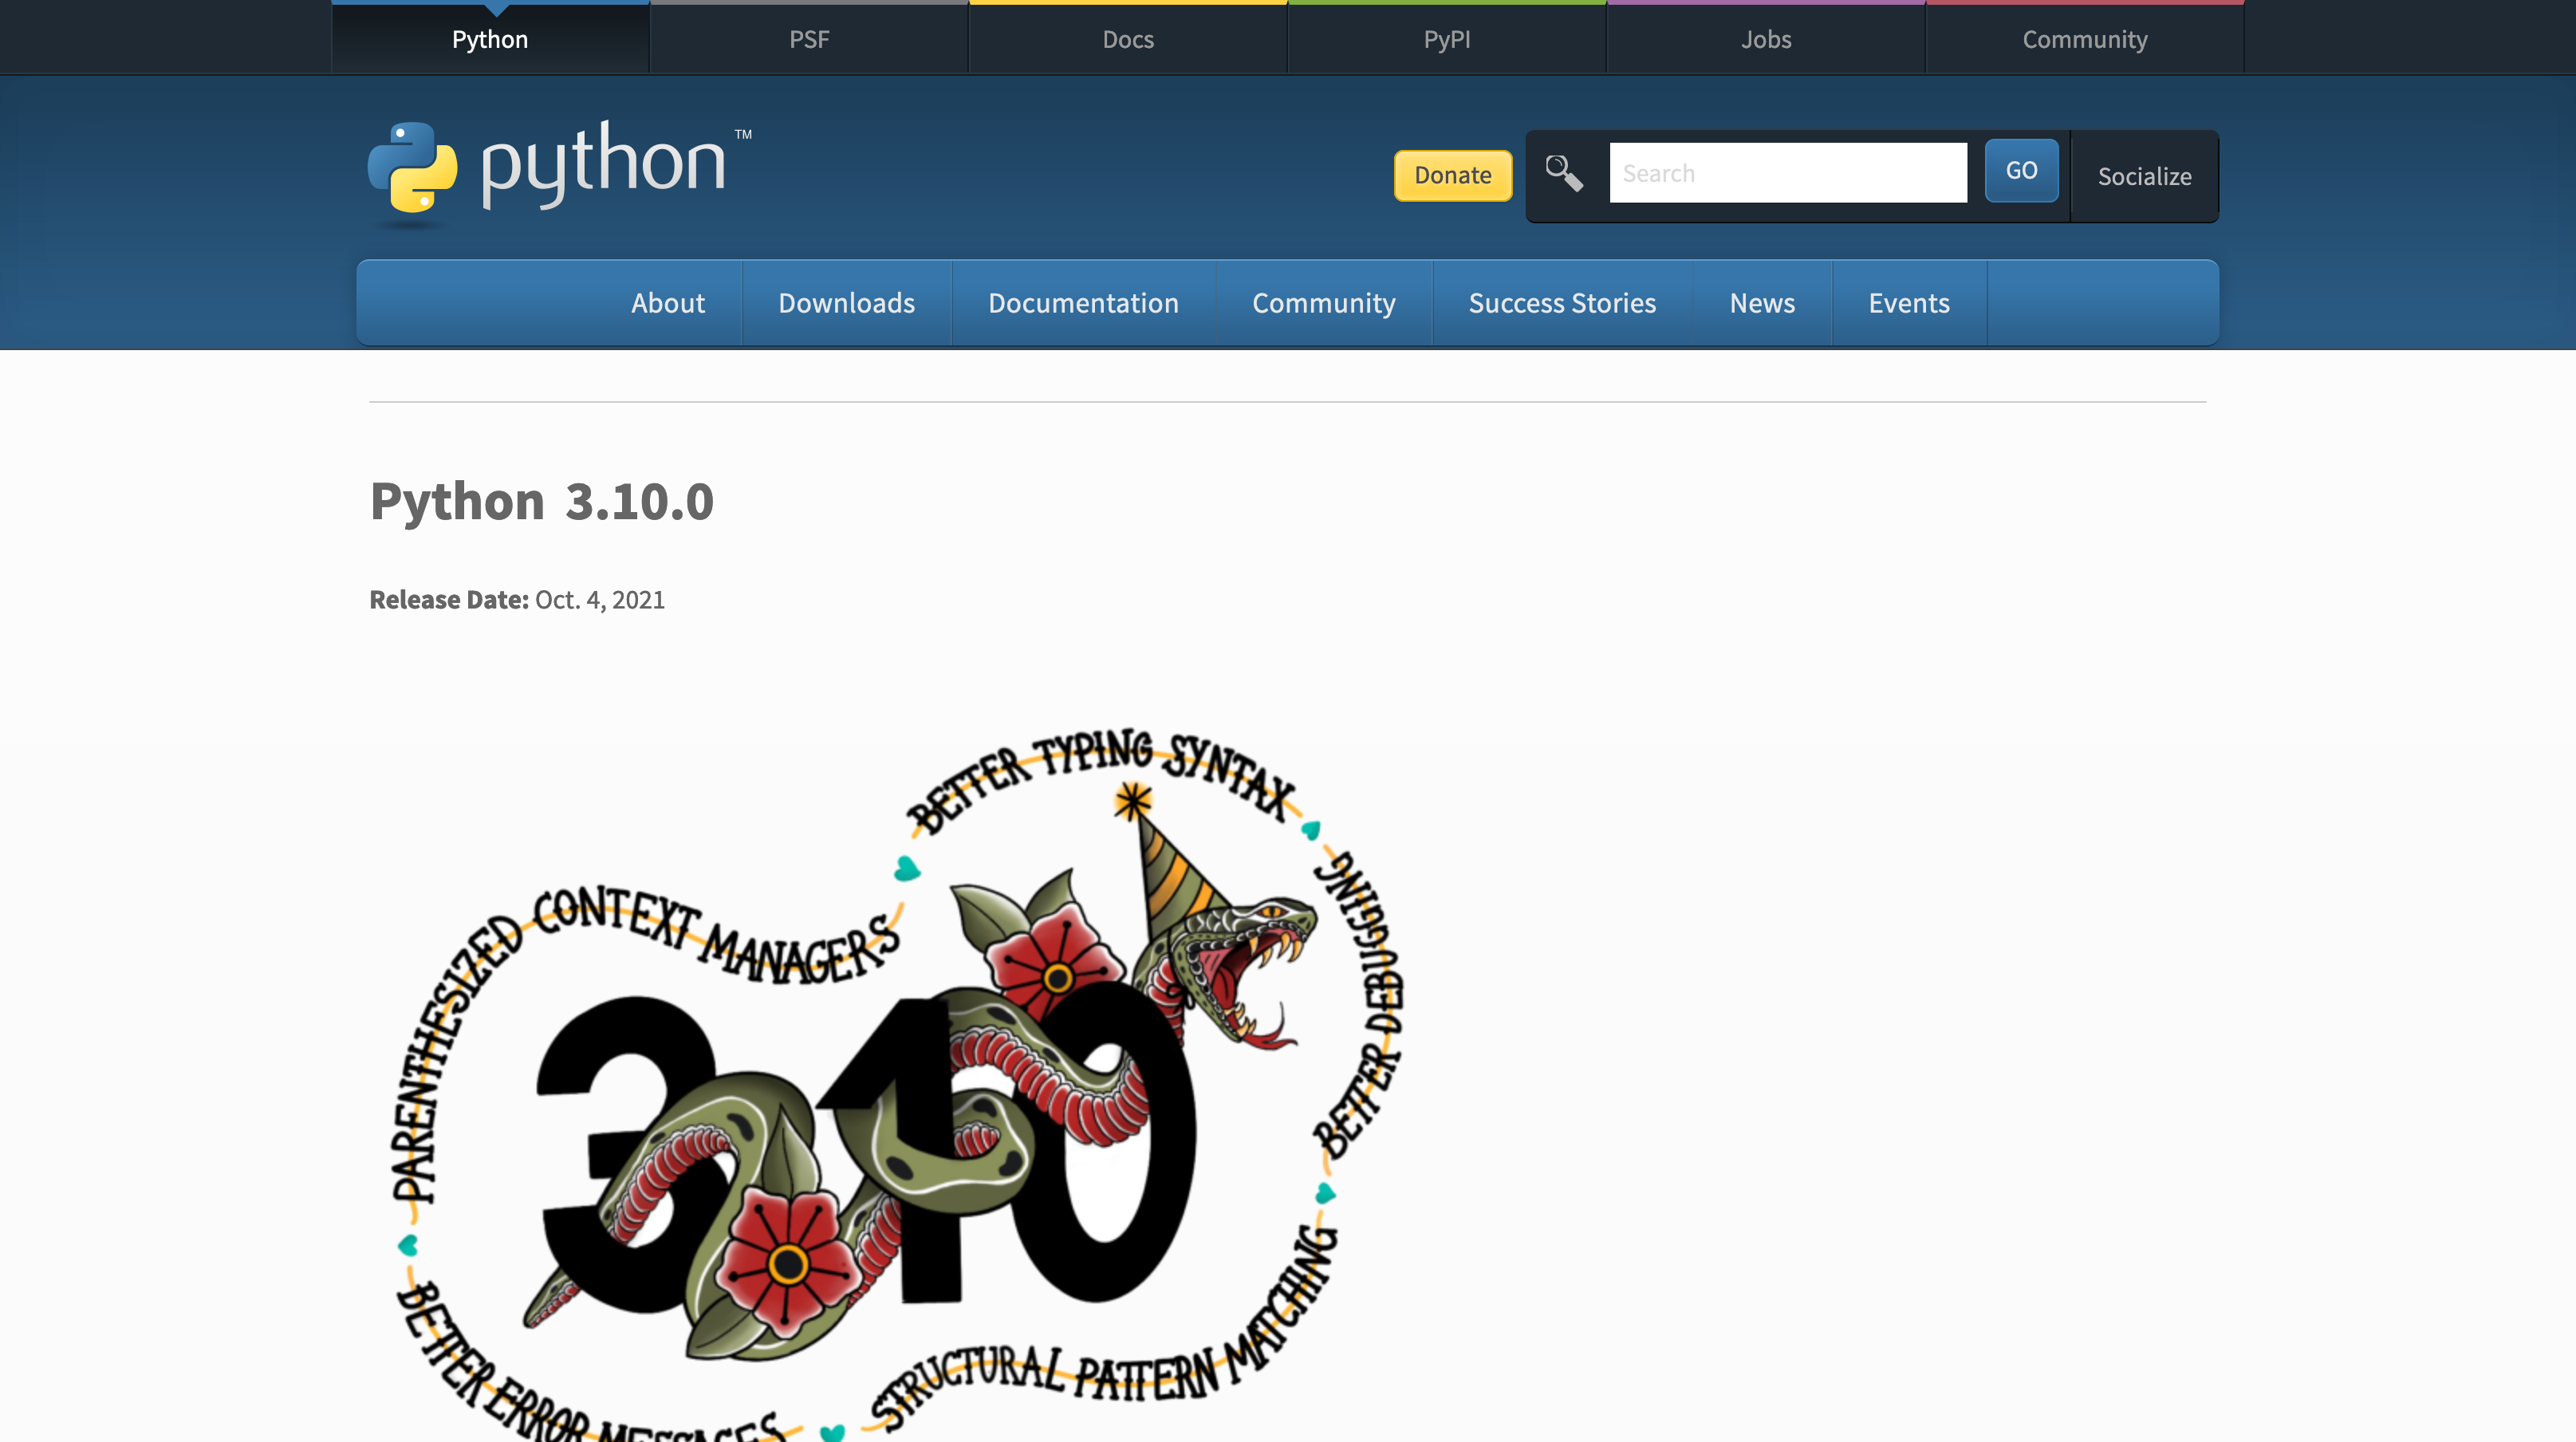 ../_images/python3.10.0.png